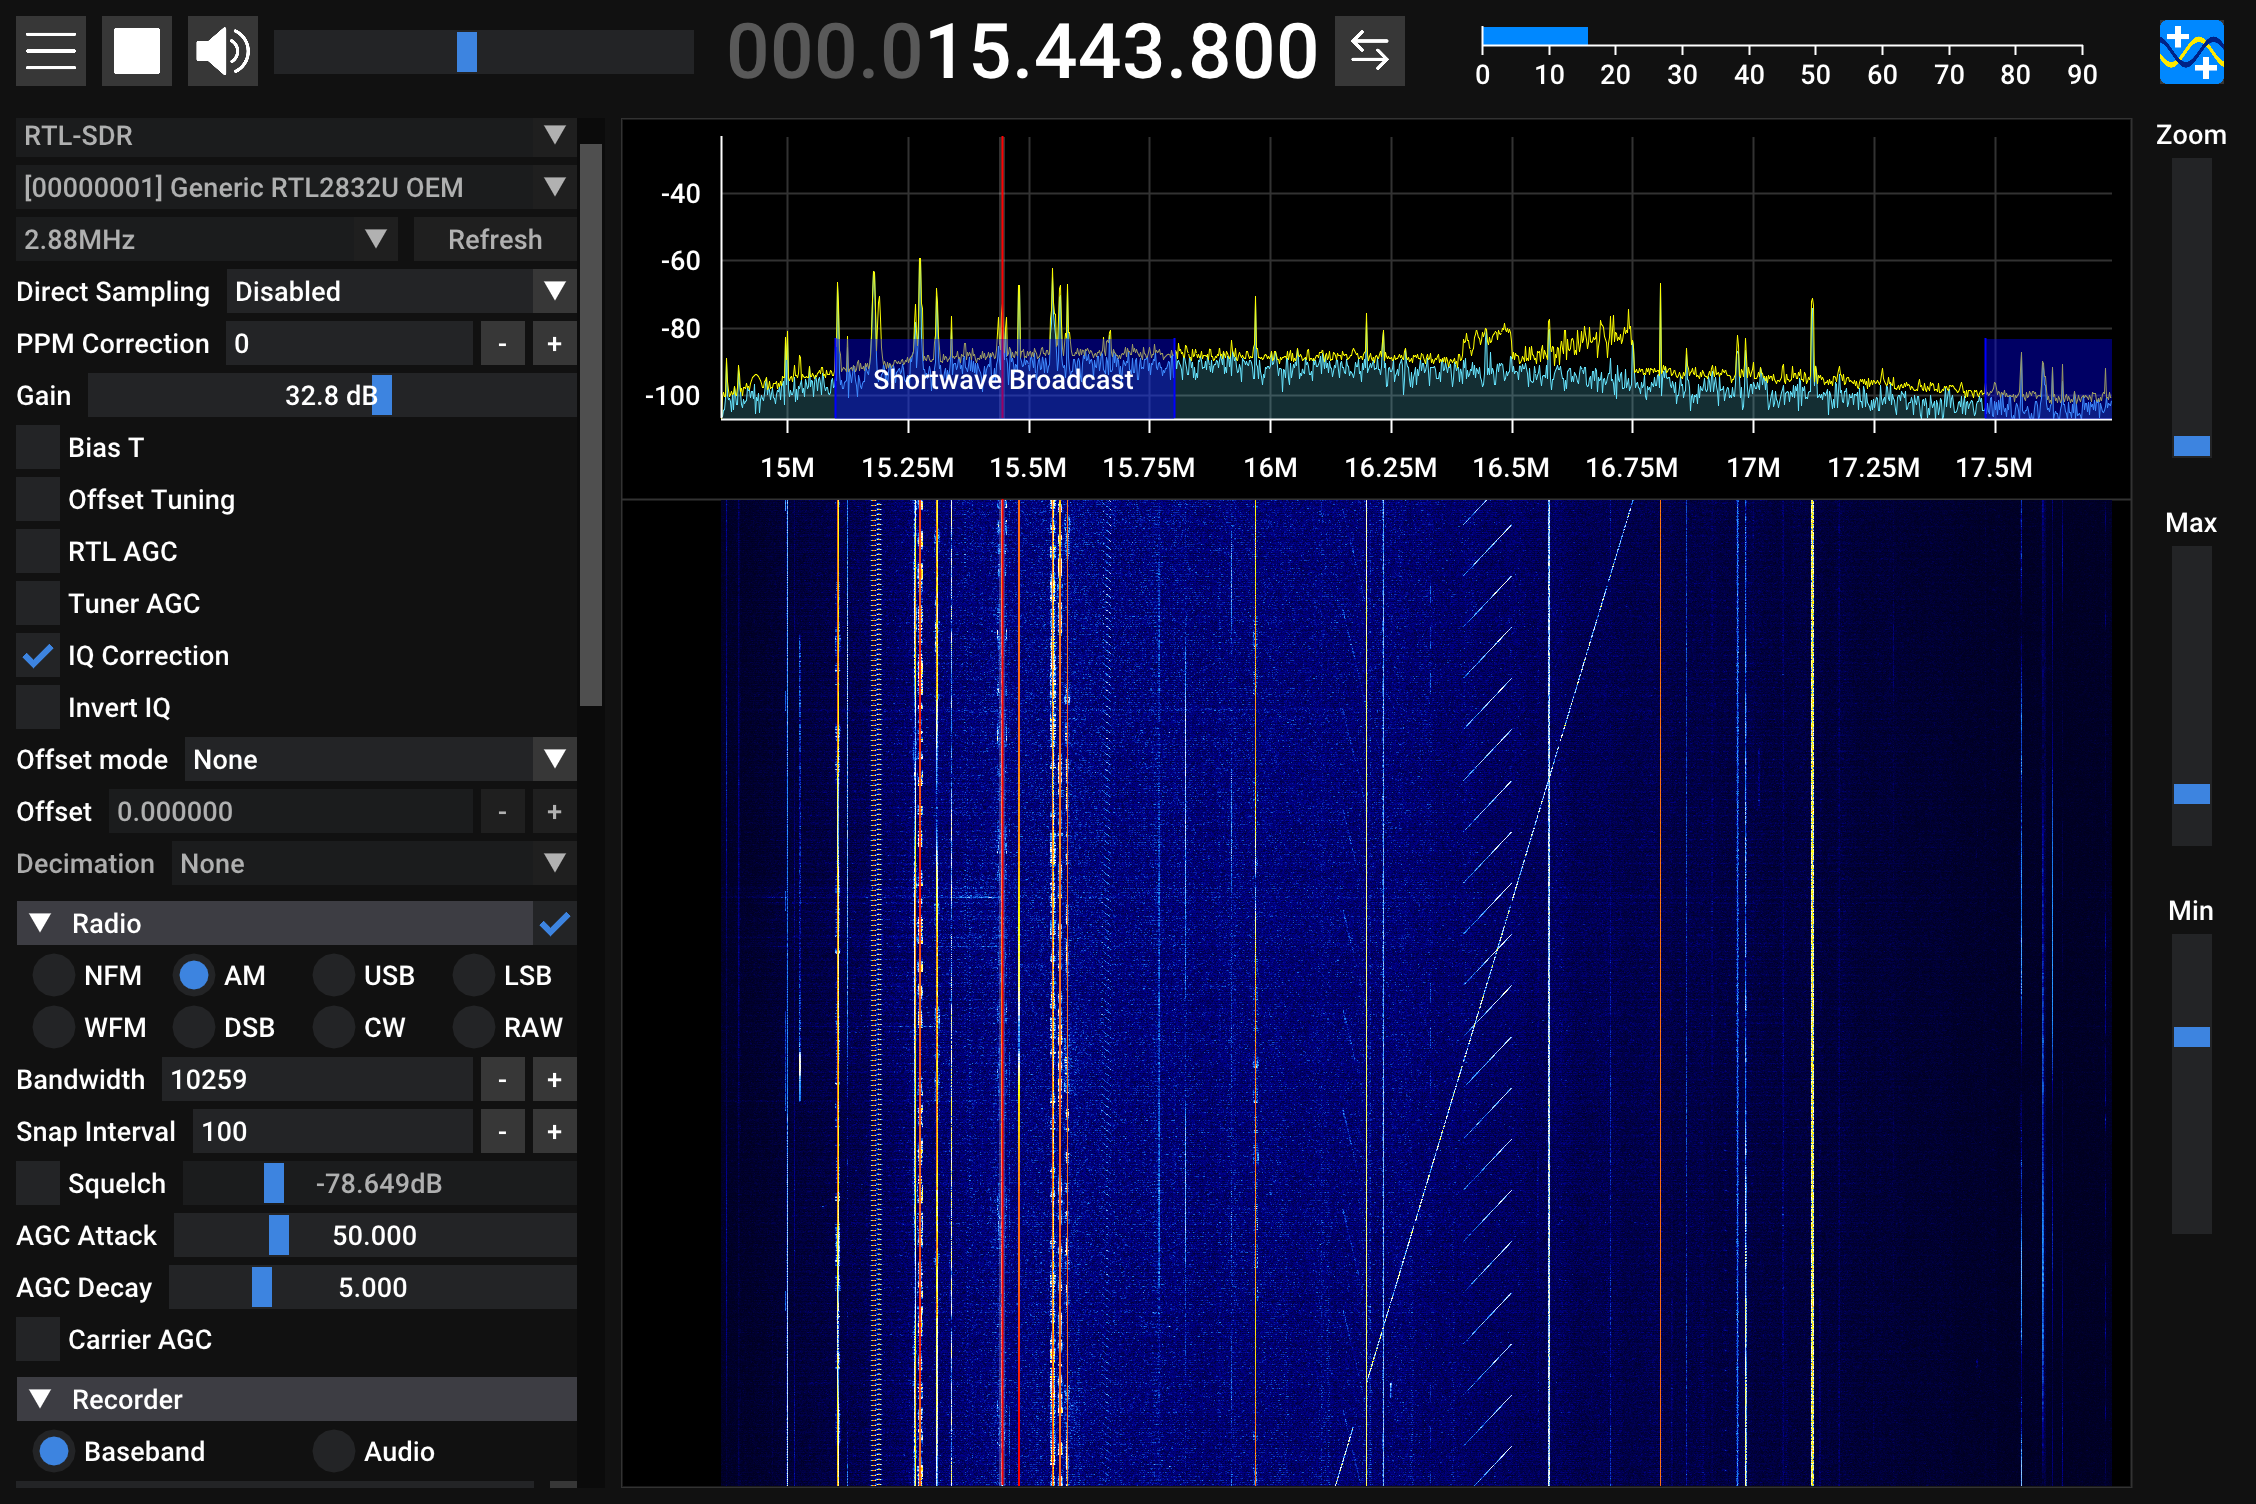 A diagonal line across 16 MHz, and a shorter, repeating pattern, repeating 4 times a second.